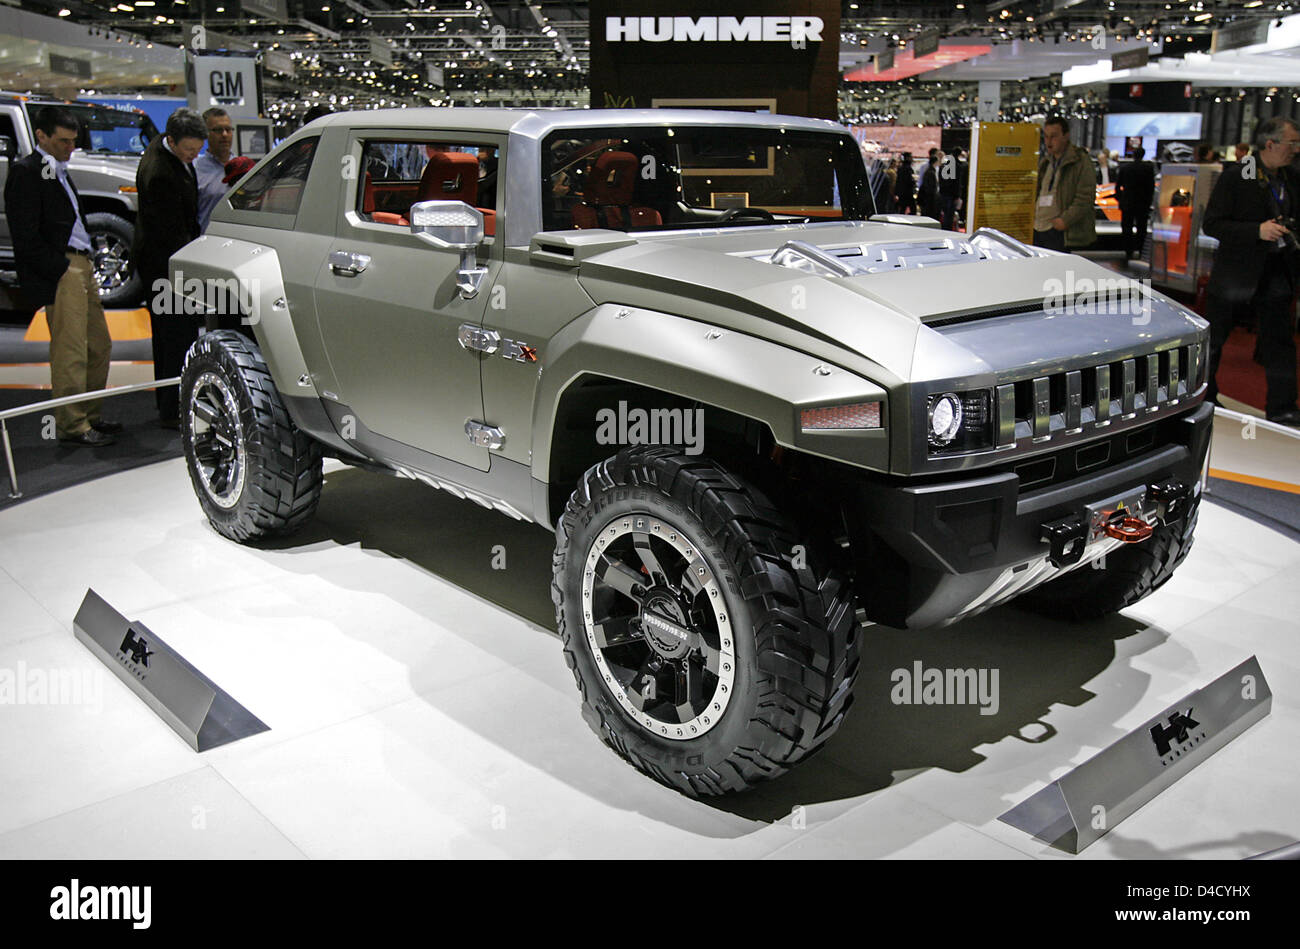 The Hummer HX Concept  is pictured during the second press day at the 78th International Motor Show Geneva, Switzerland, 05 March 2008. Some 260 exhibitors from 30 nations showcase on 77,550 square metres their latest developments at the 78th International Motor Show Geneva running from 06 through 16 March. Photo: MARIJAN MURAT Stock Photo